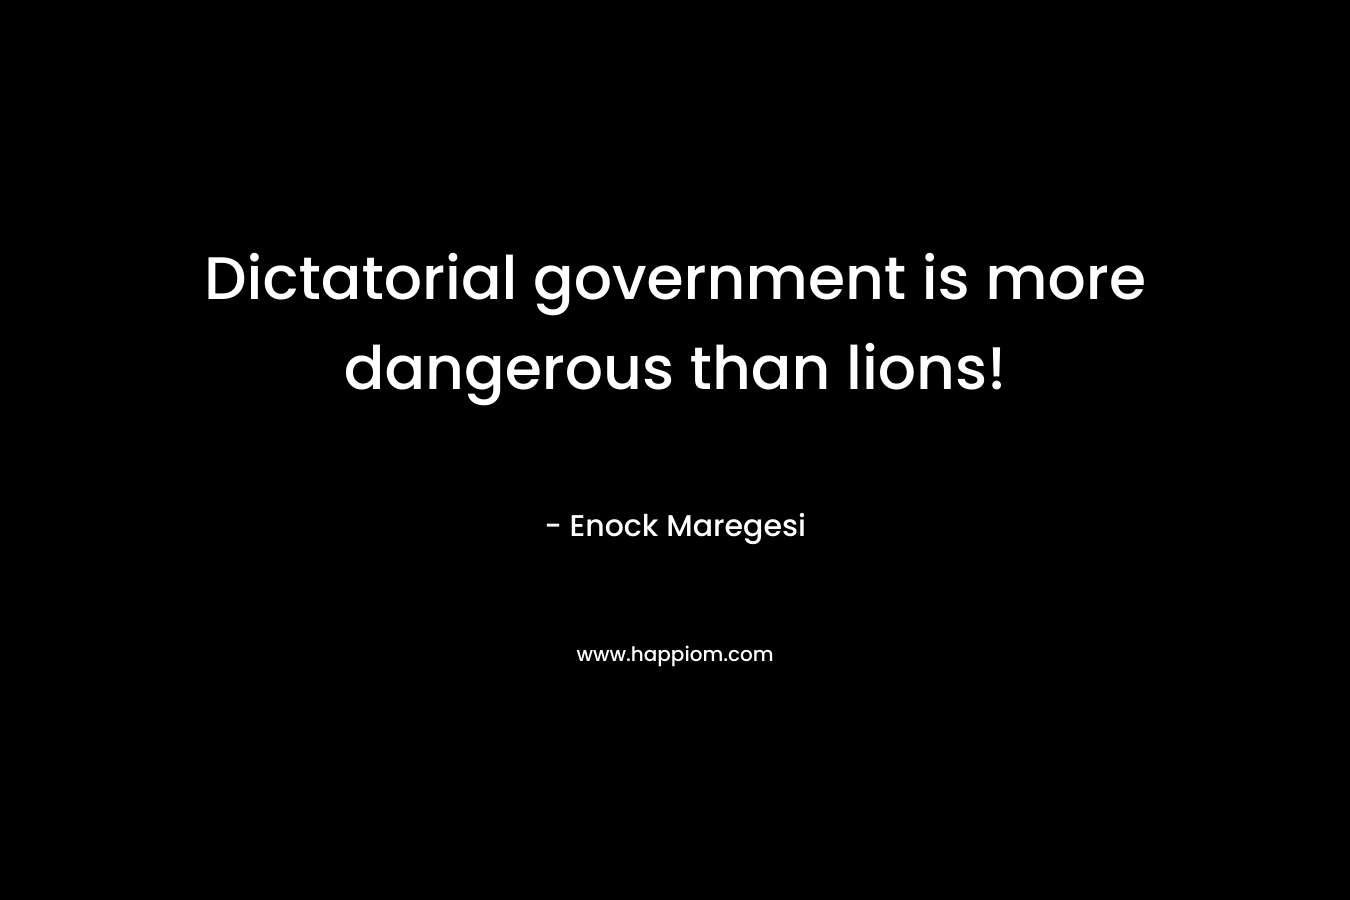 Dictatorial government is more dangerous than lions!